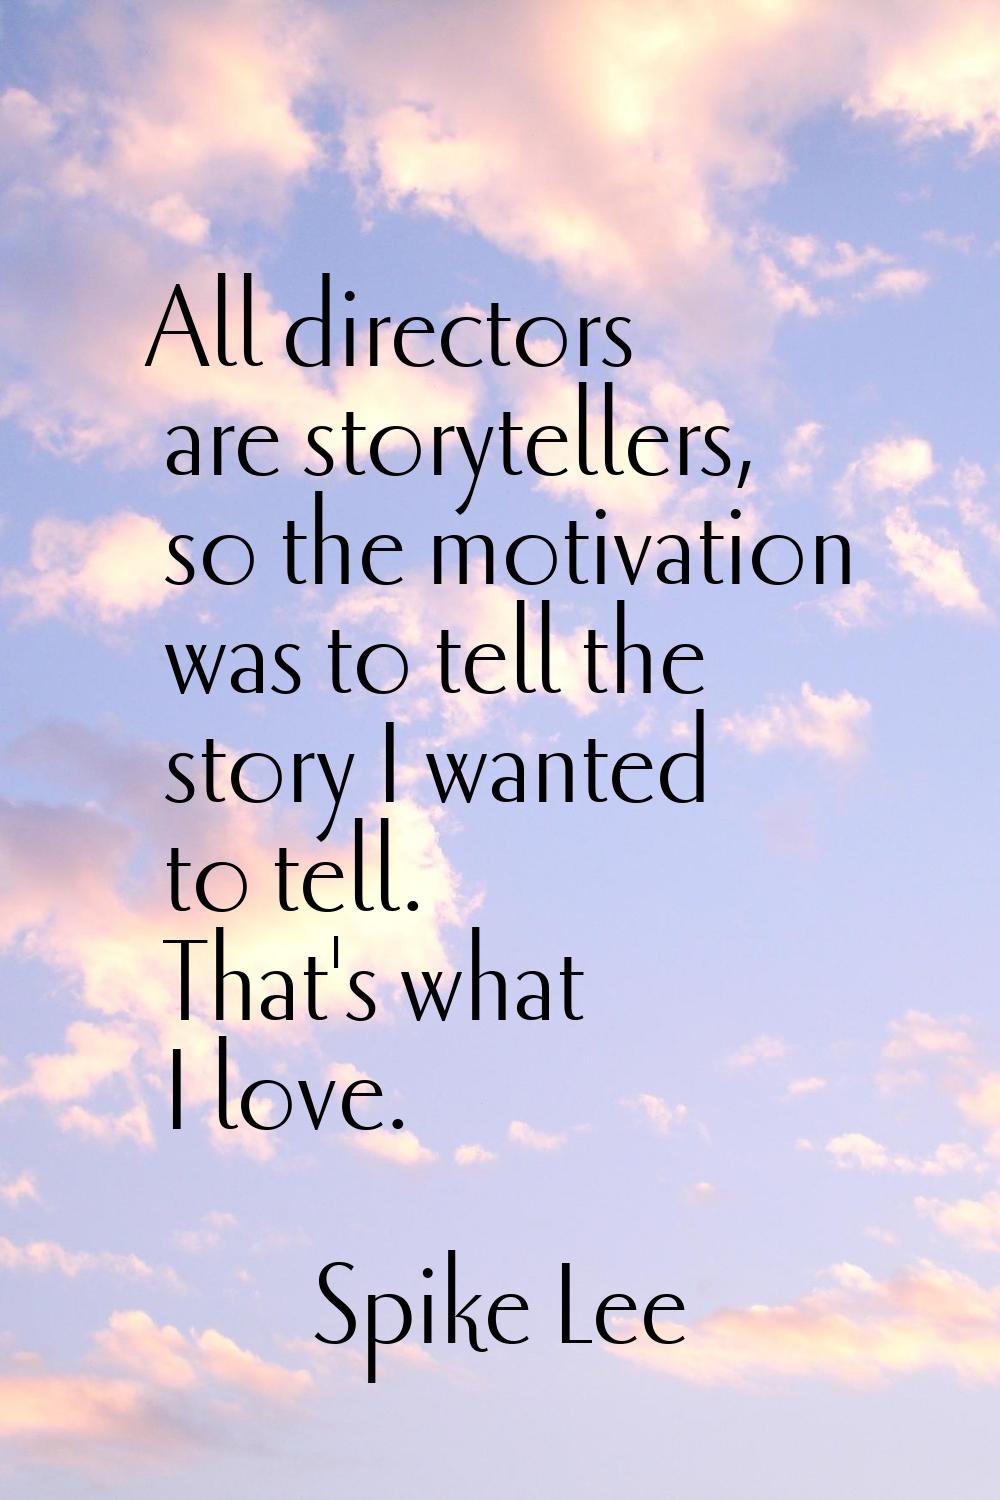 All directors are storytellers, so the motivation was to tell the story I wanted to tell. That's wh